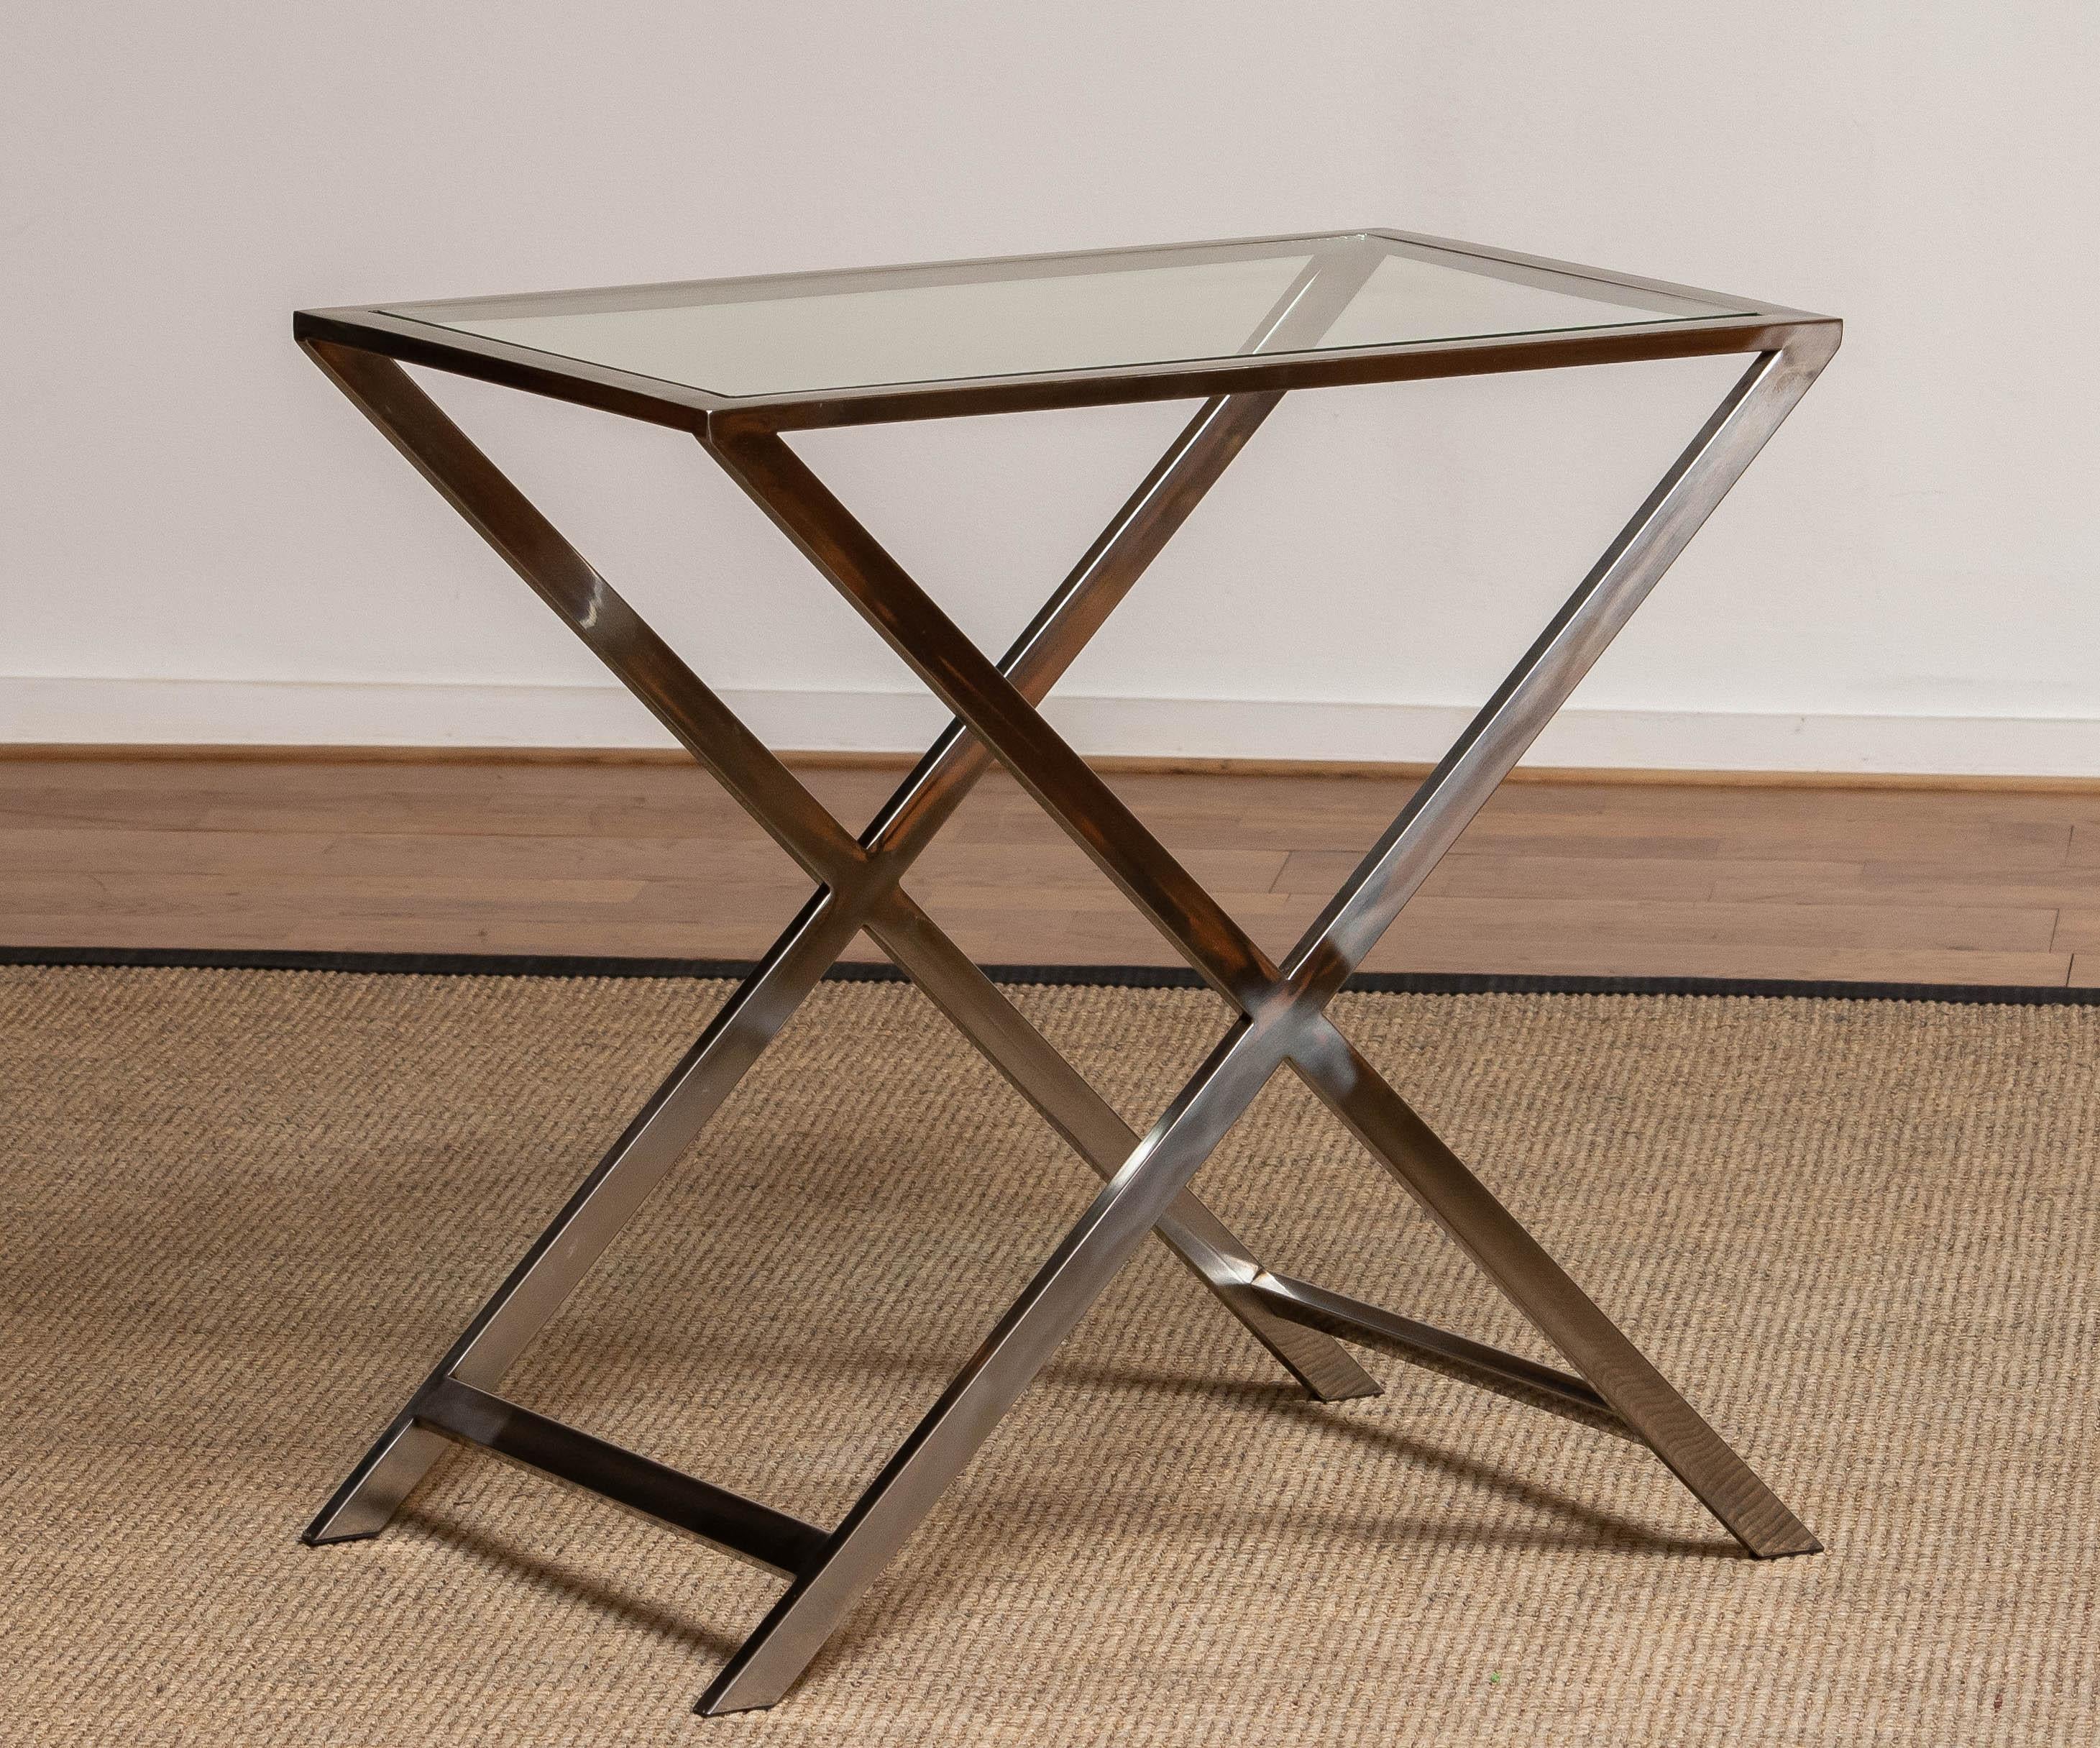 Italian 1970's Chrome X / Cross Legs Site Table with Glass Top in Milo Baughman Style For Sale